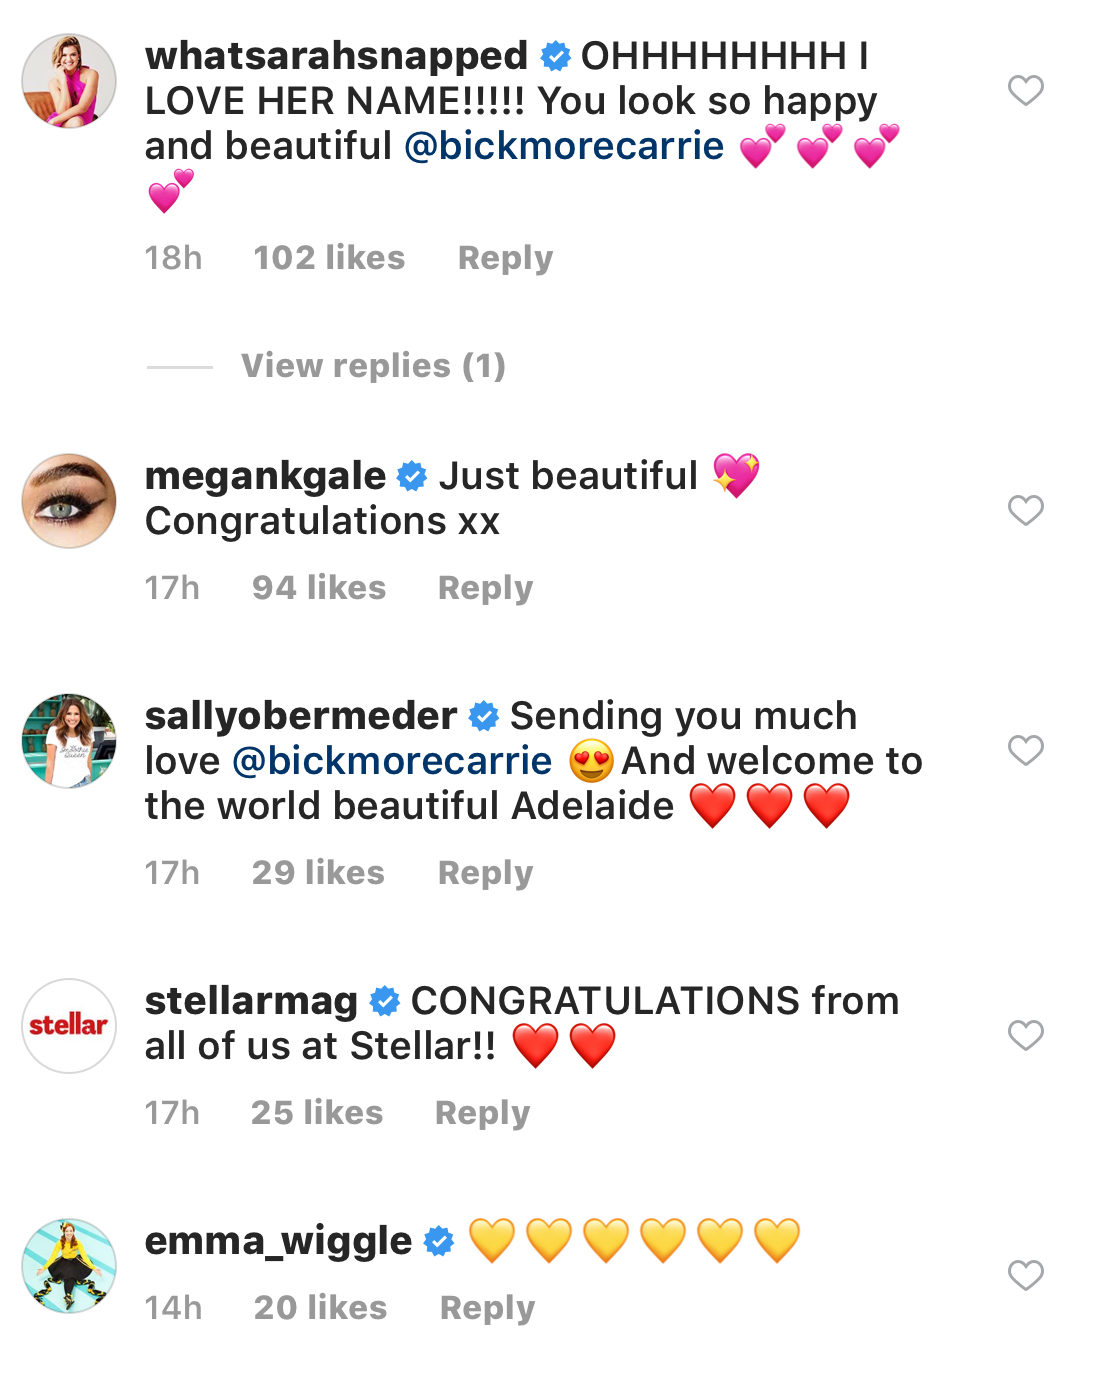 Carrie instagram comments